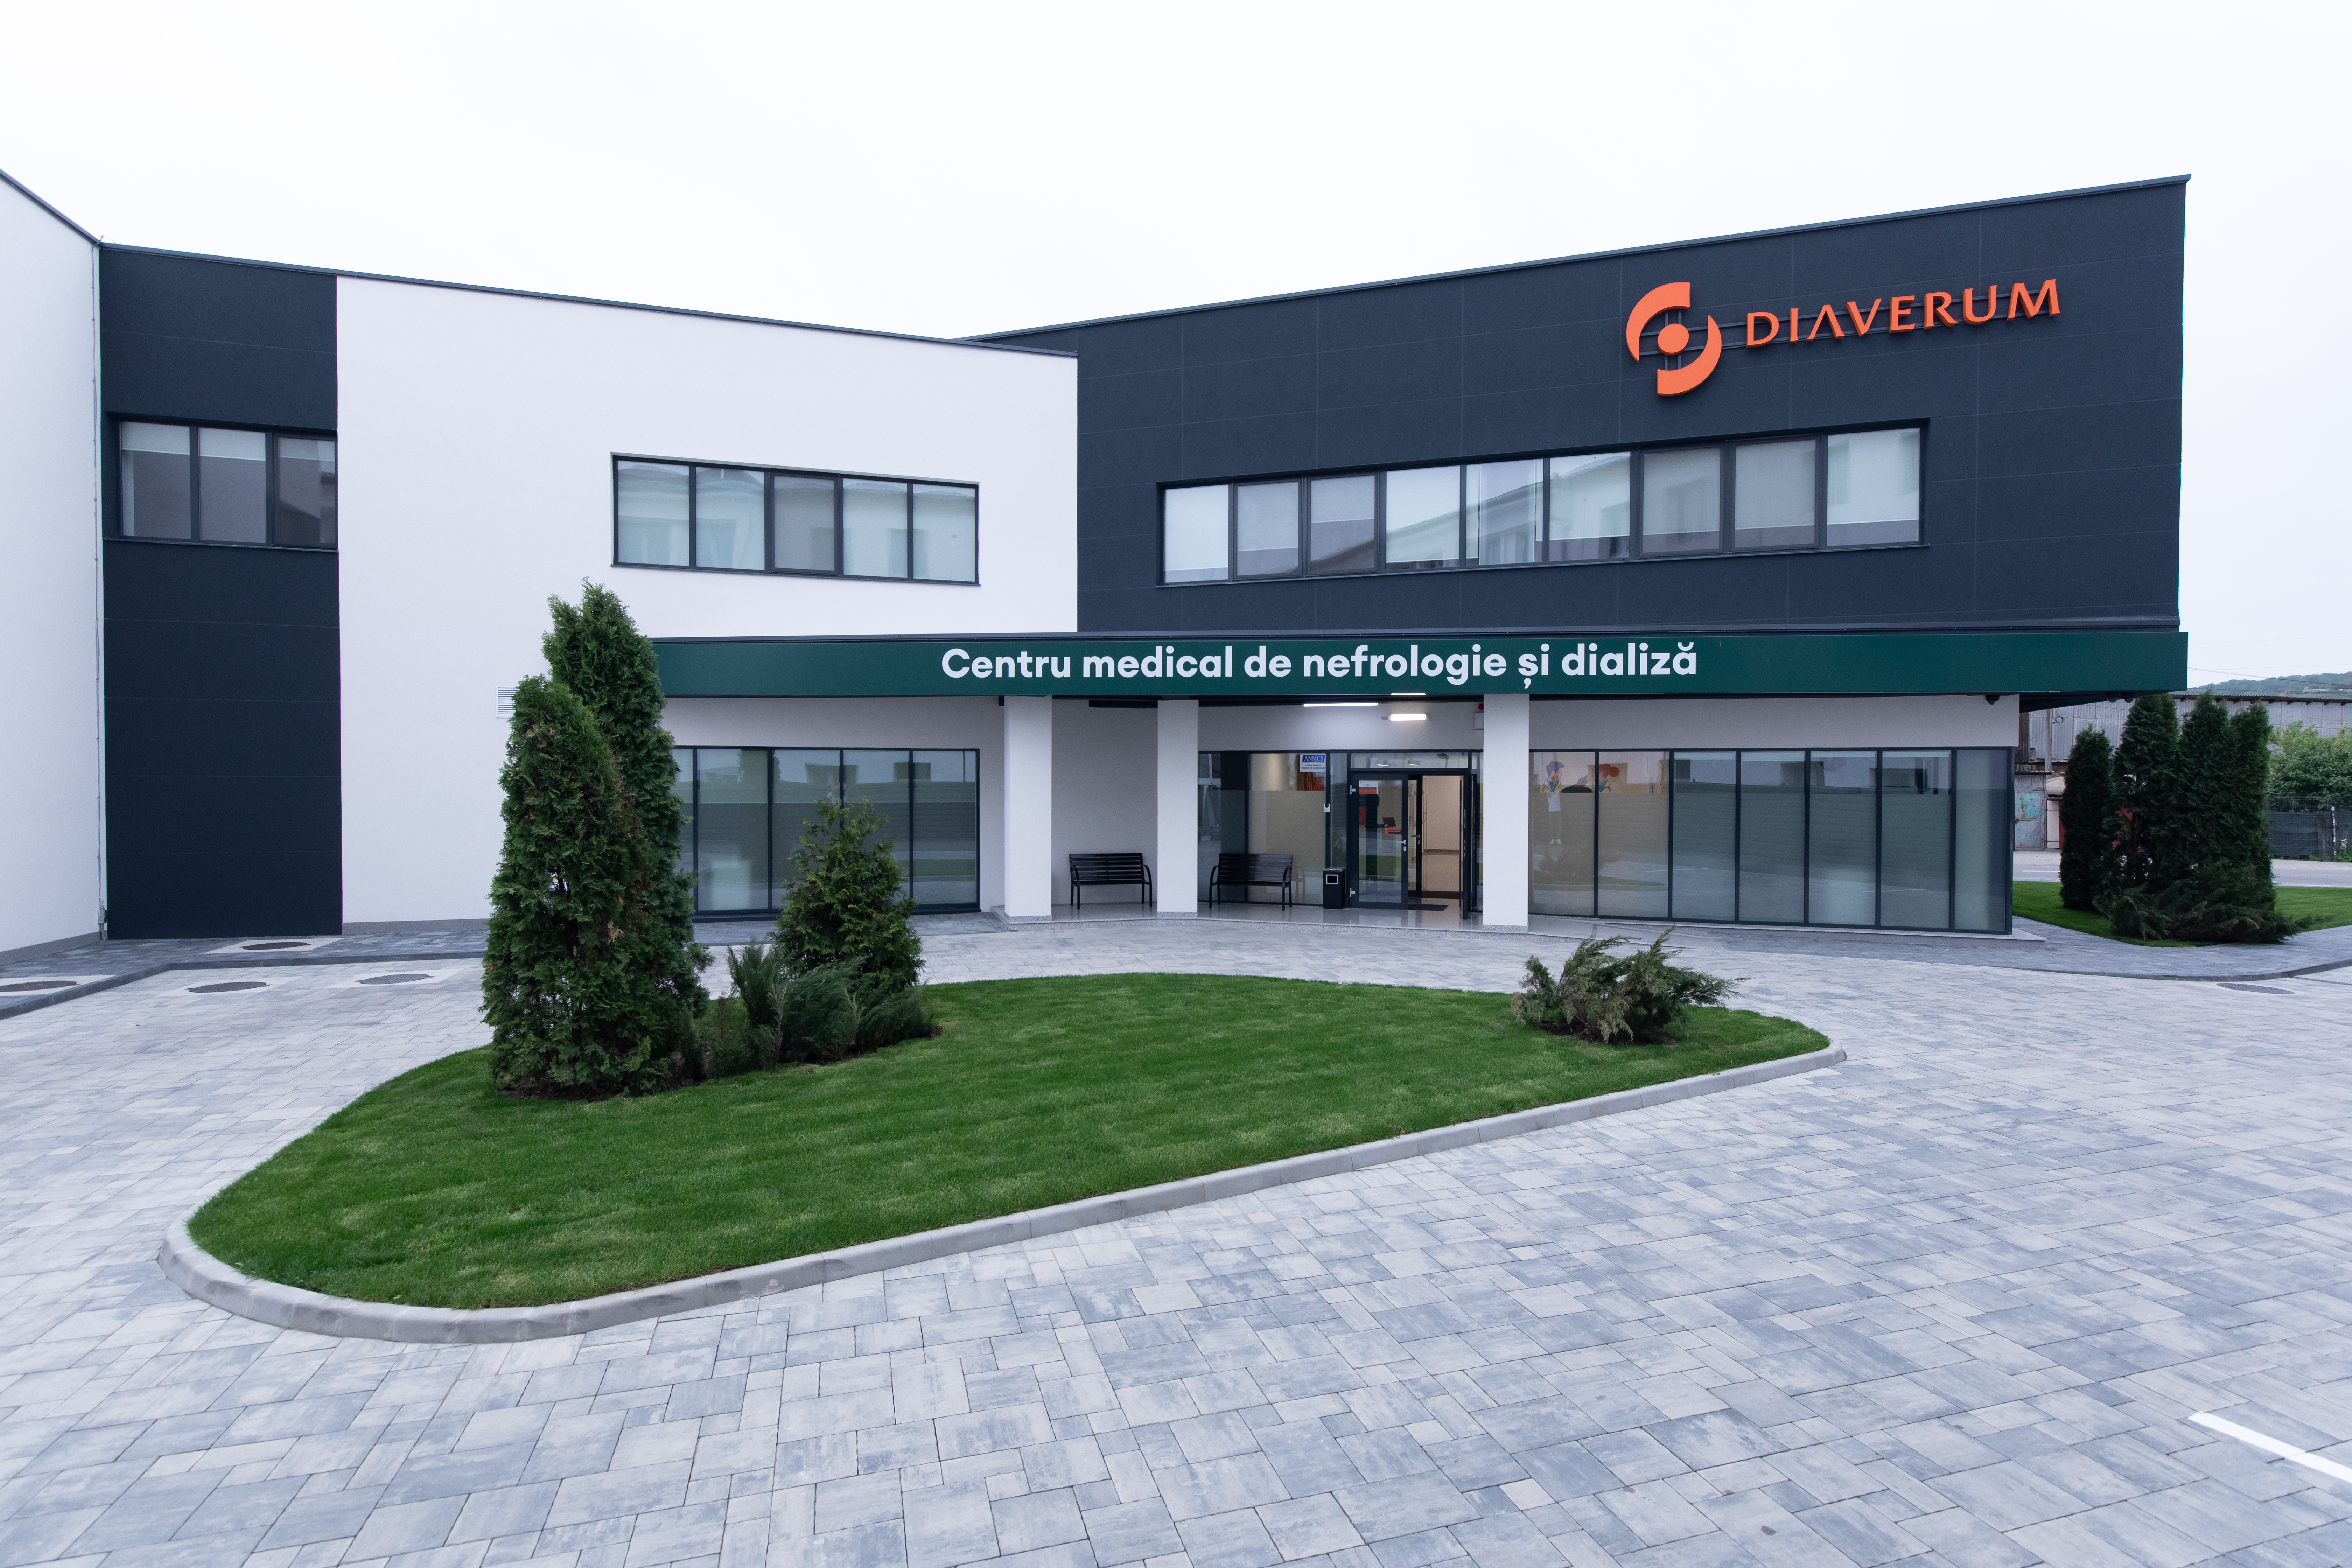 Diaverum Romania launches modern nephrology and dialysis medical centre in Mediaș  - new building.jpg